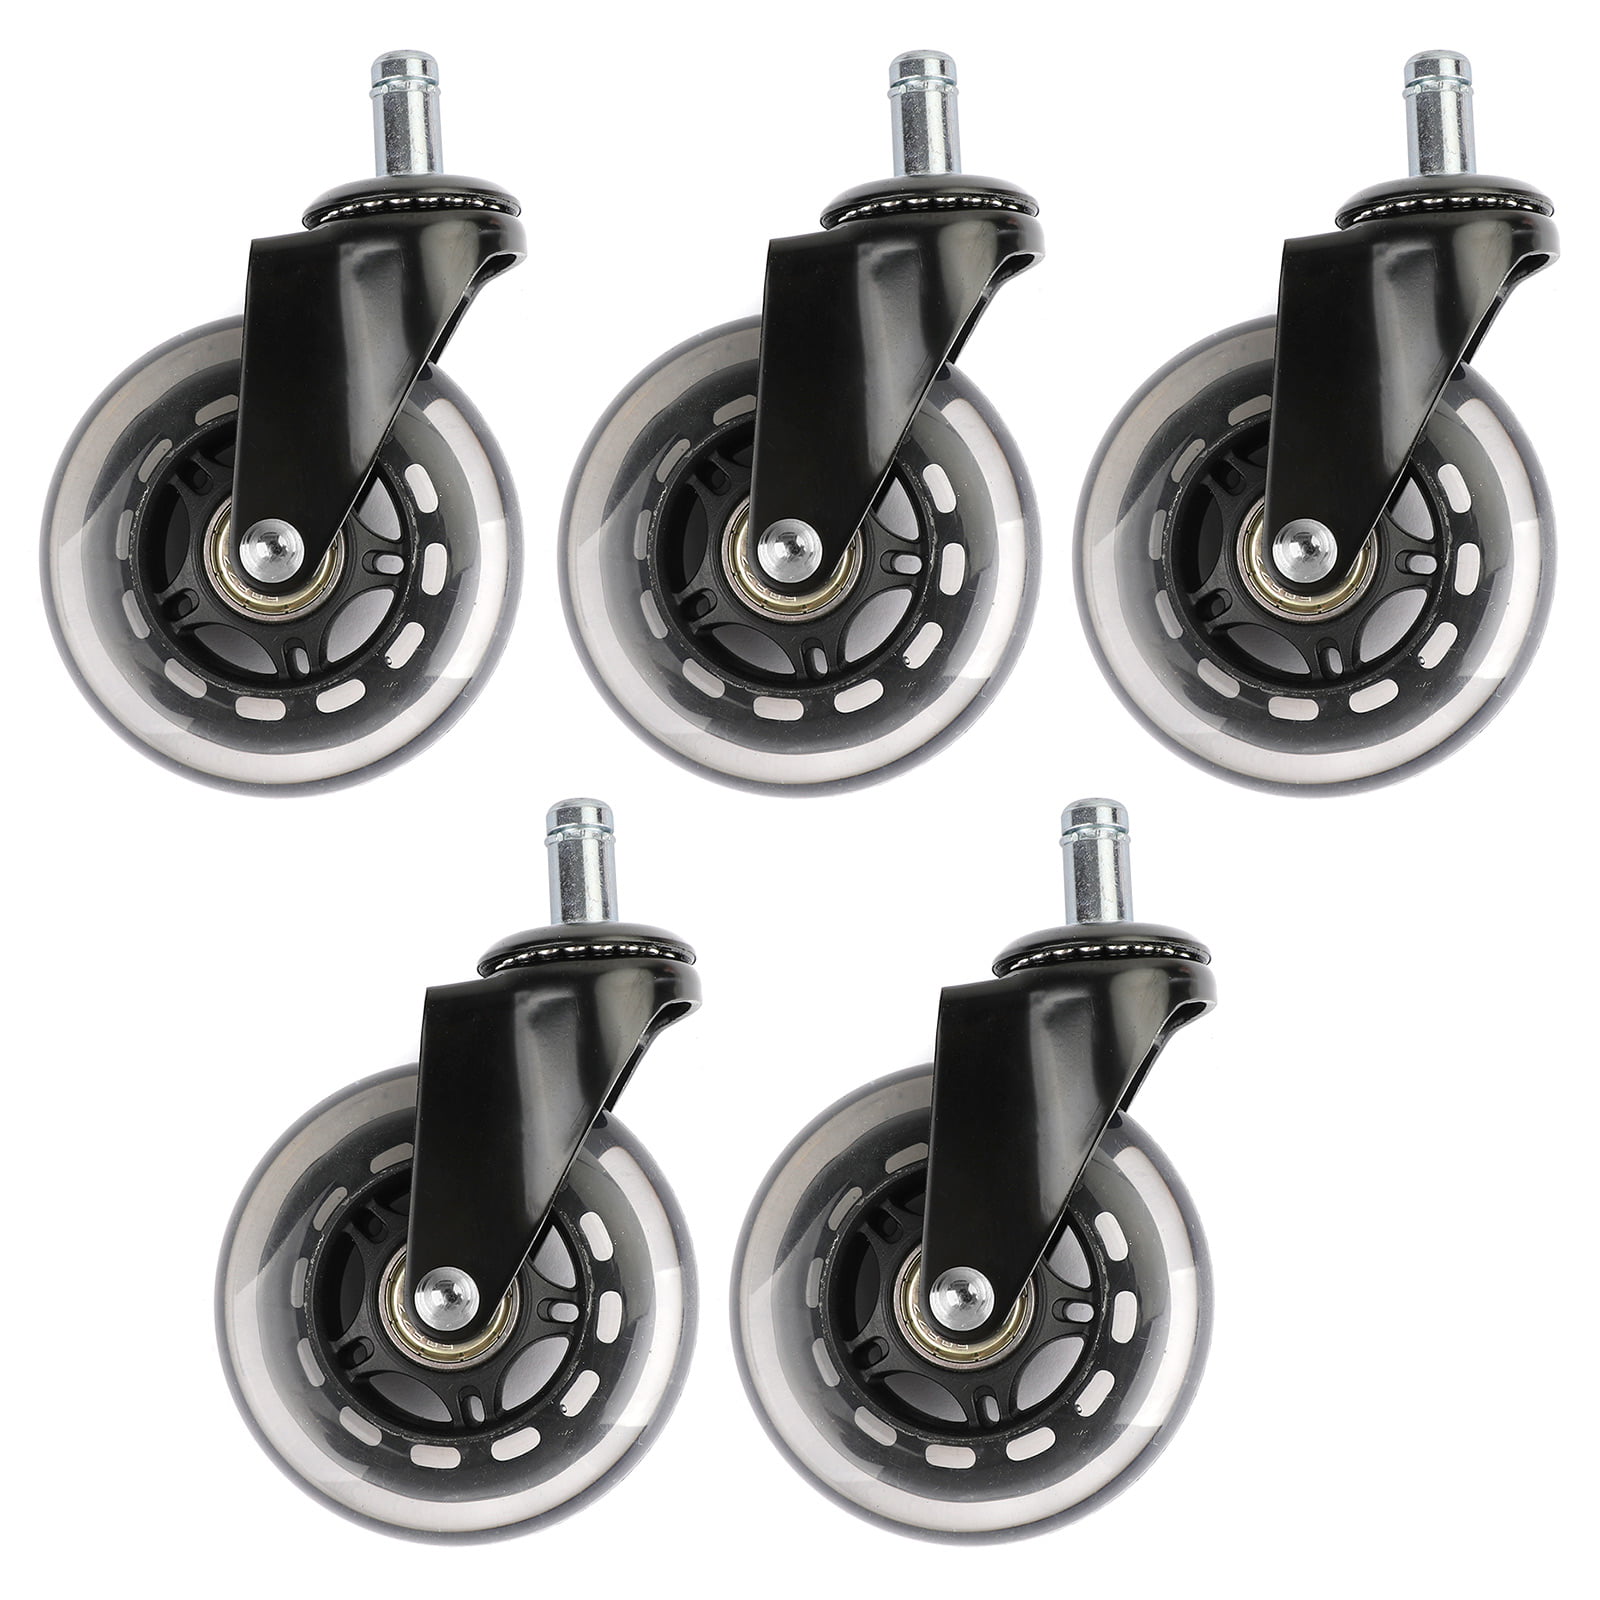 Replacement Office Chair Caster Wheels 3" Set of 5-Heavy Duty 3 inch Black